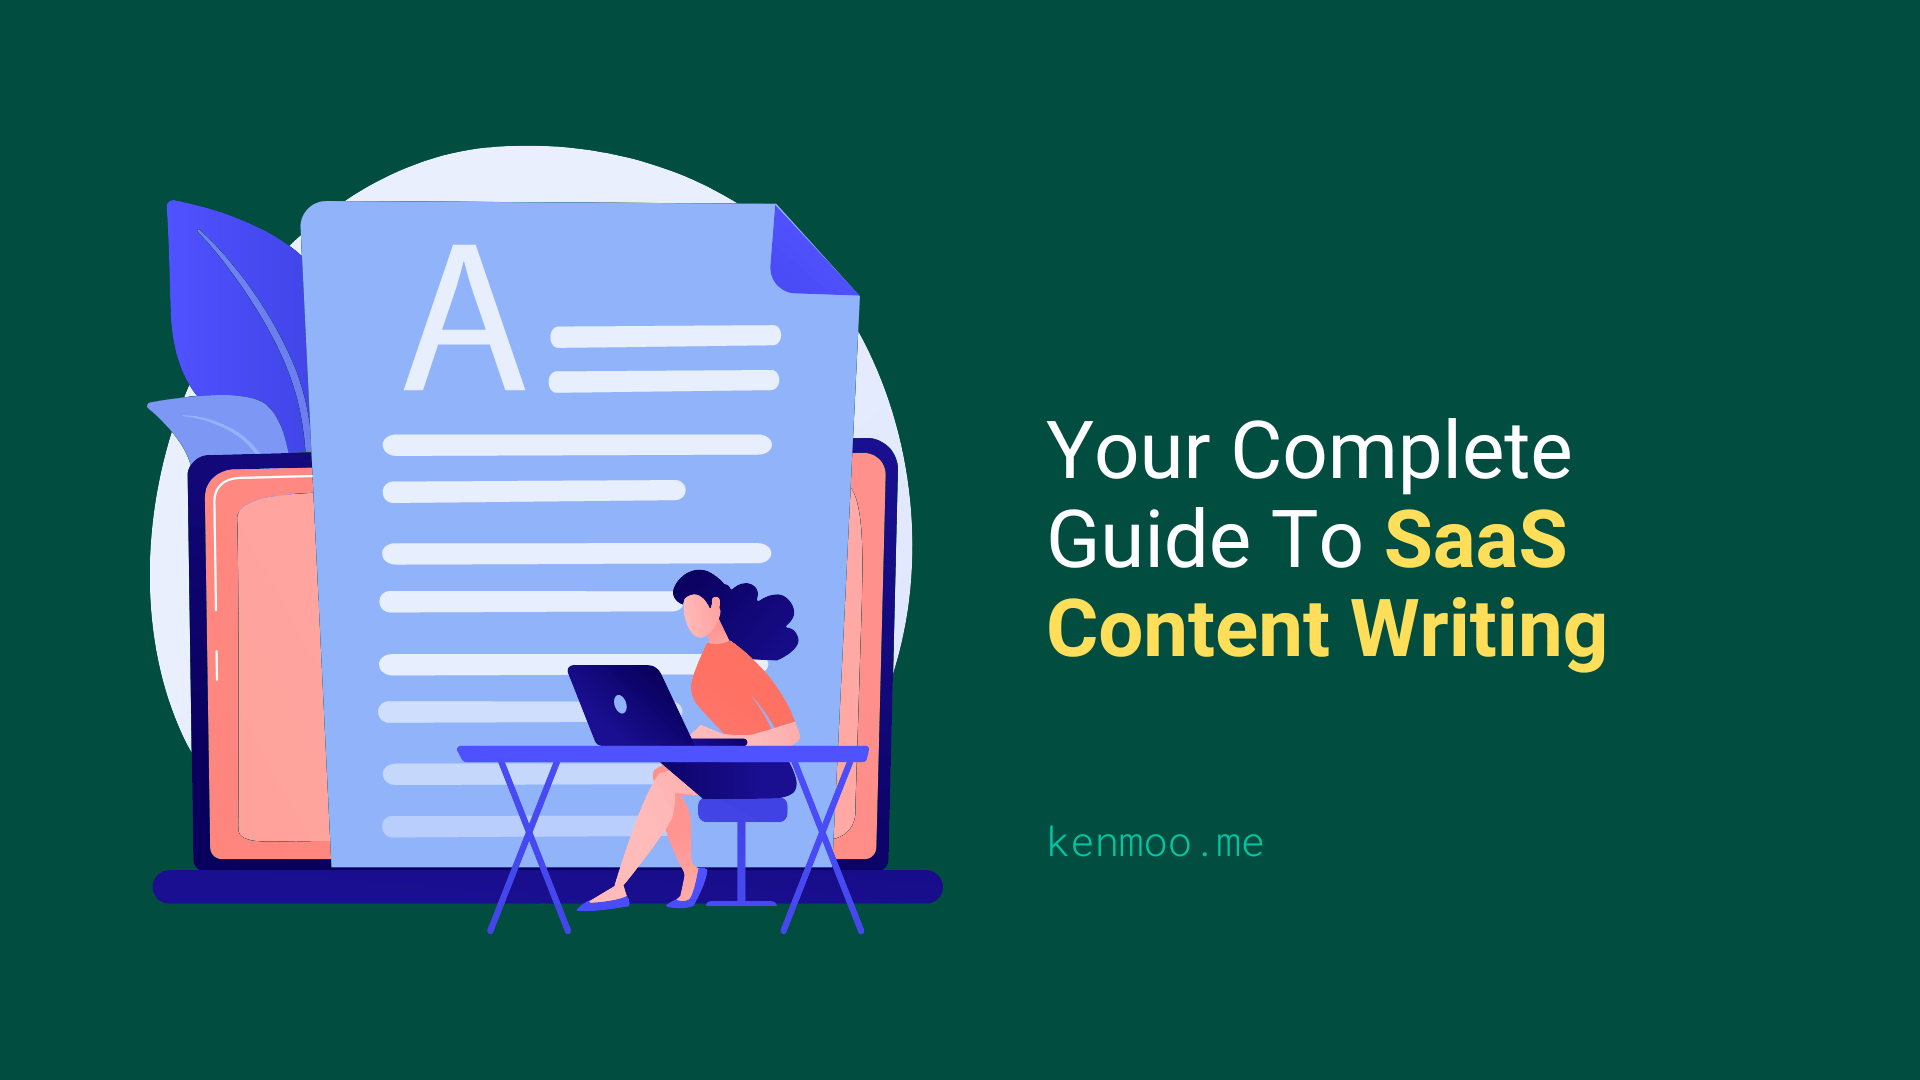 Your Complete Guide To SaaS Content Writing